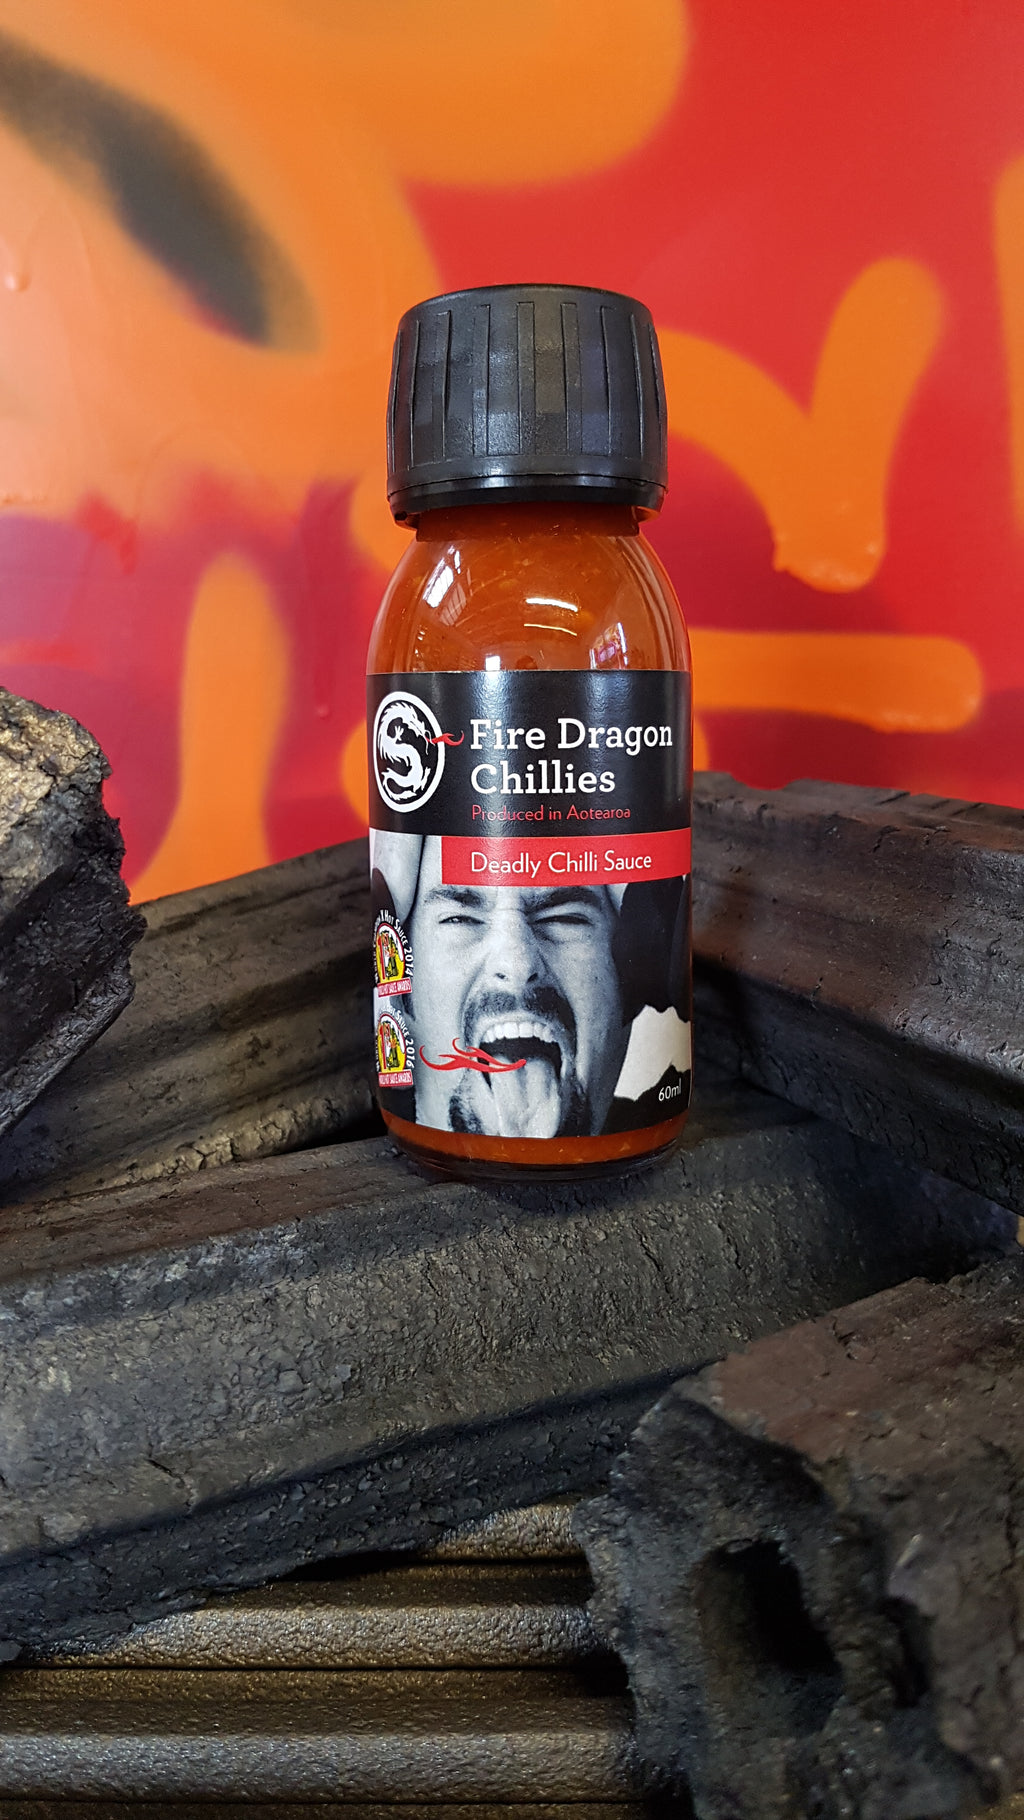 Deadly Chilli Sauce by Fire Dragon Chillies